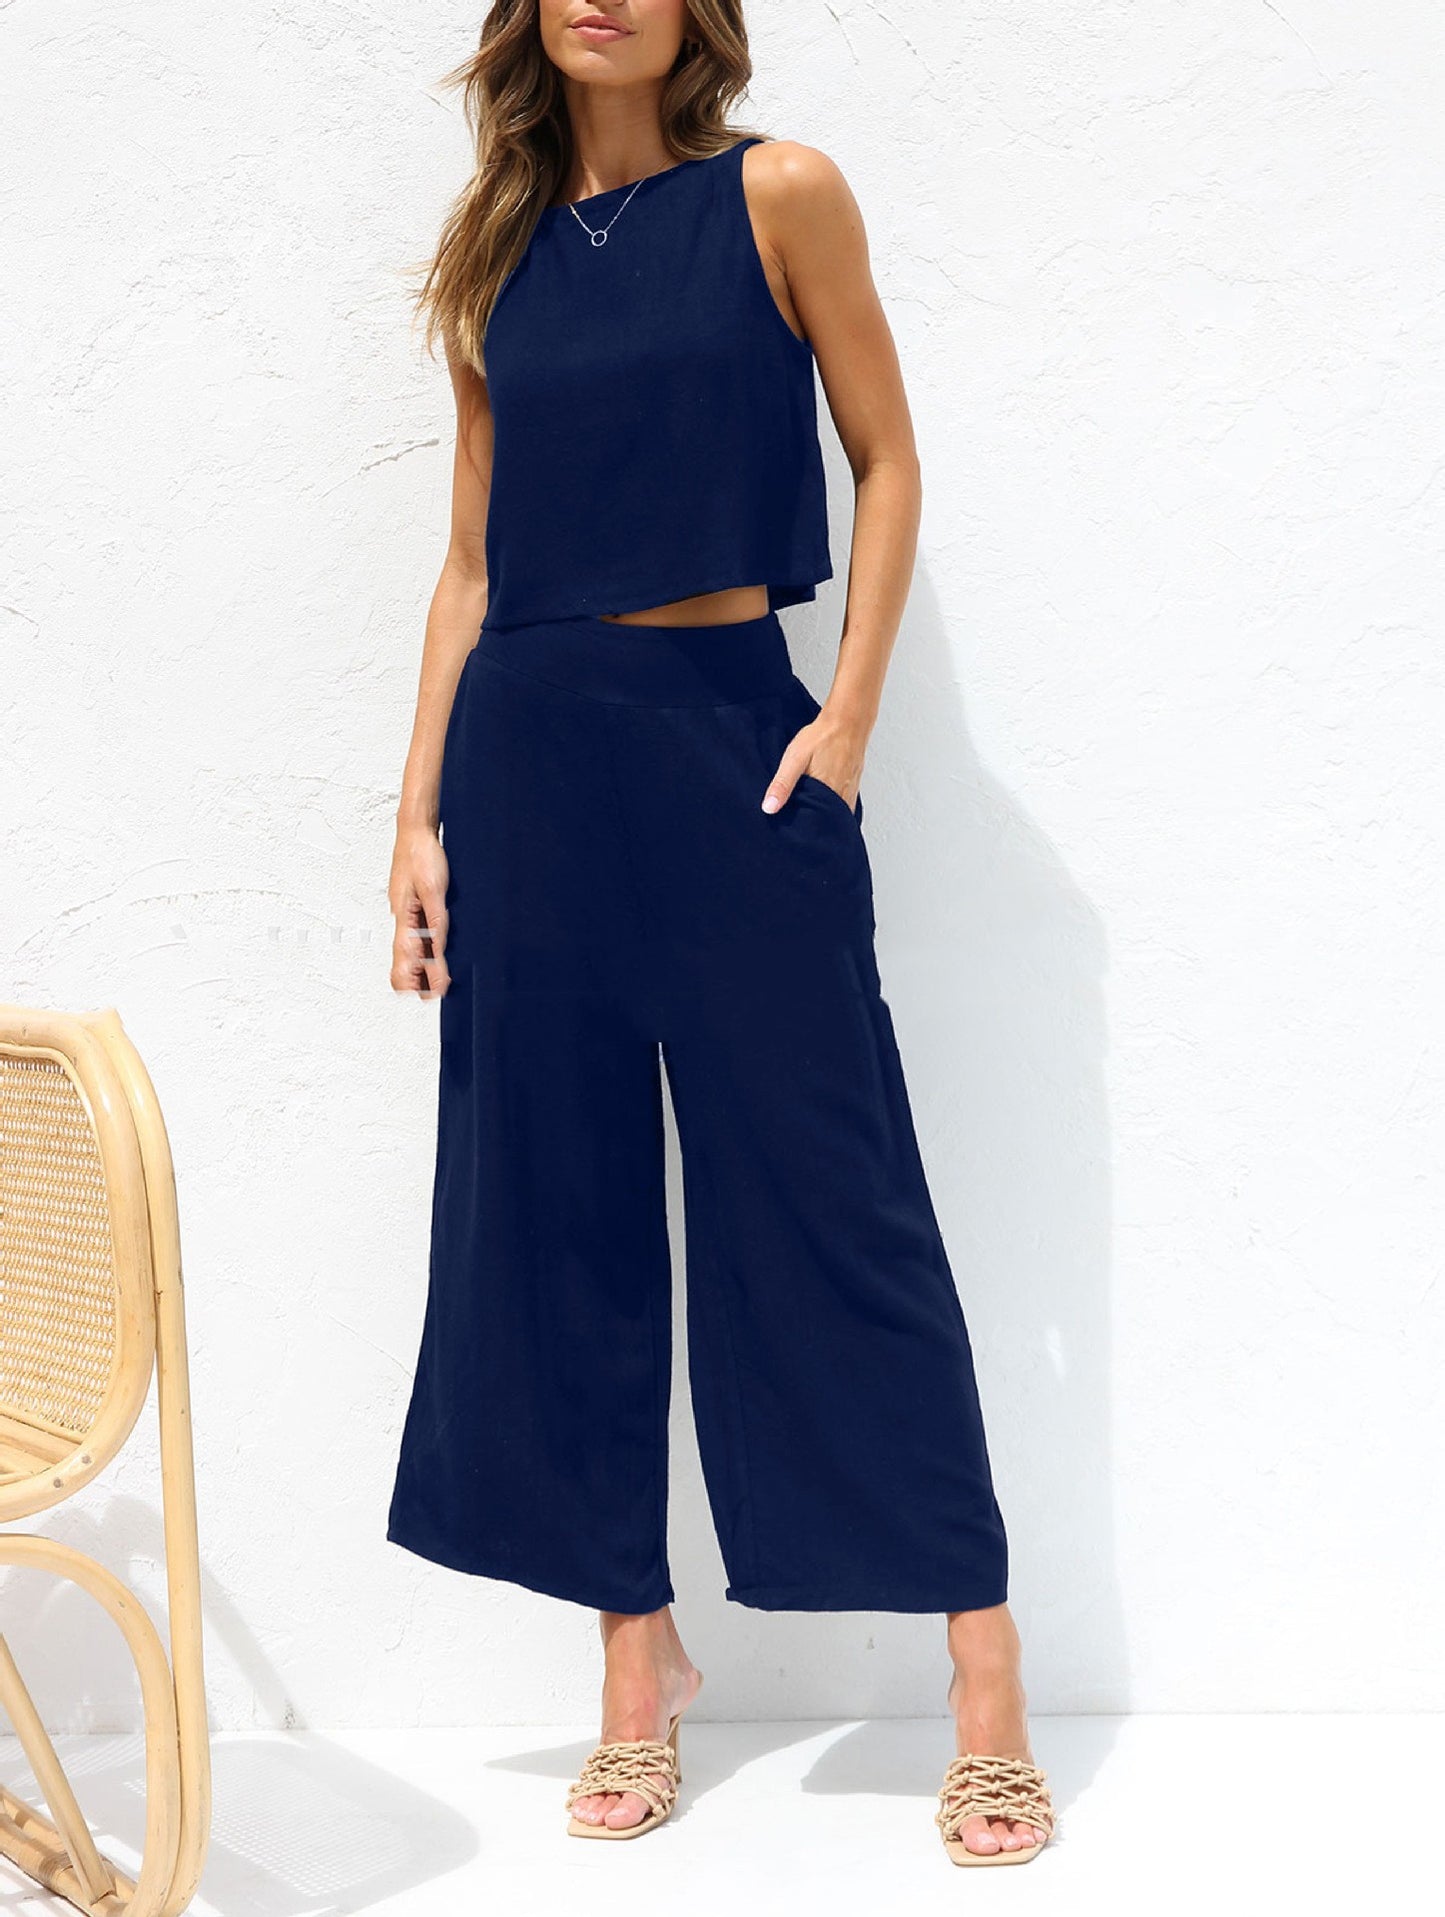 Casual Sleeveless Buckle Vest with Double Pocket Wide Leg Pants Suit